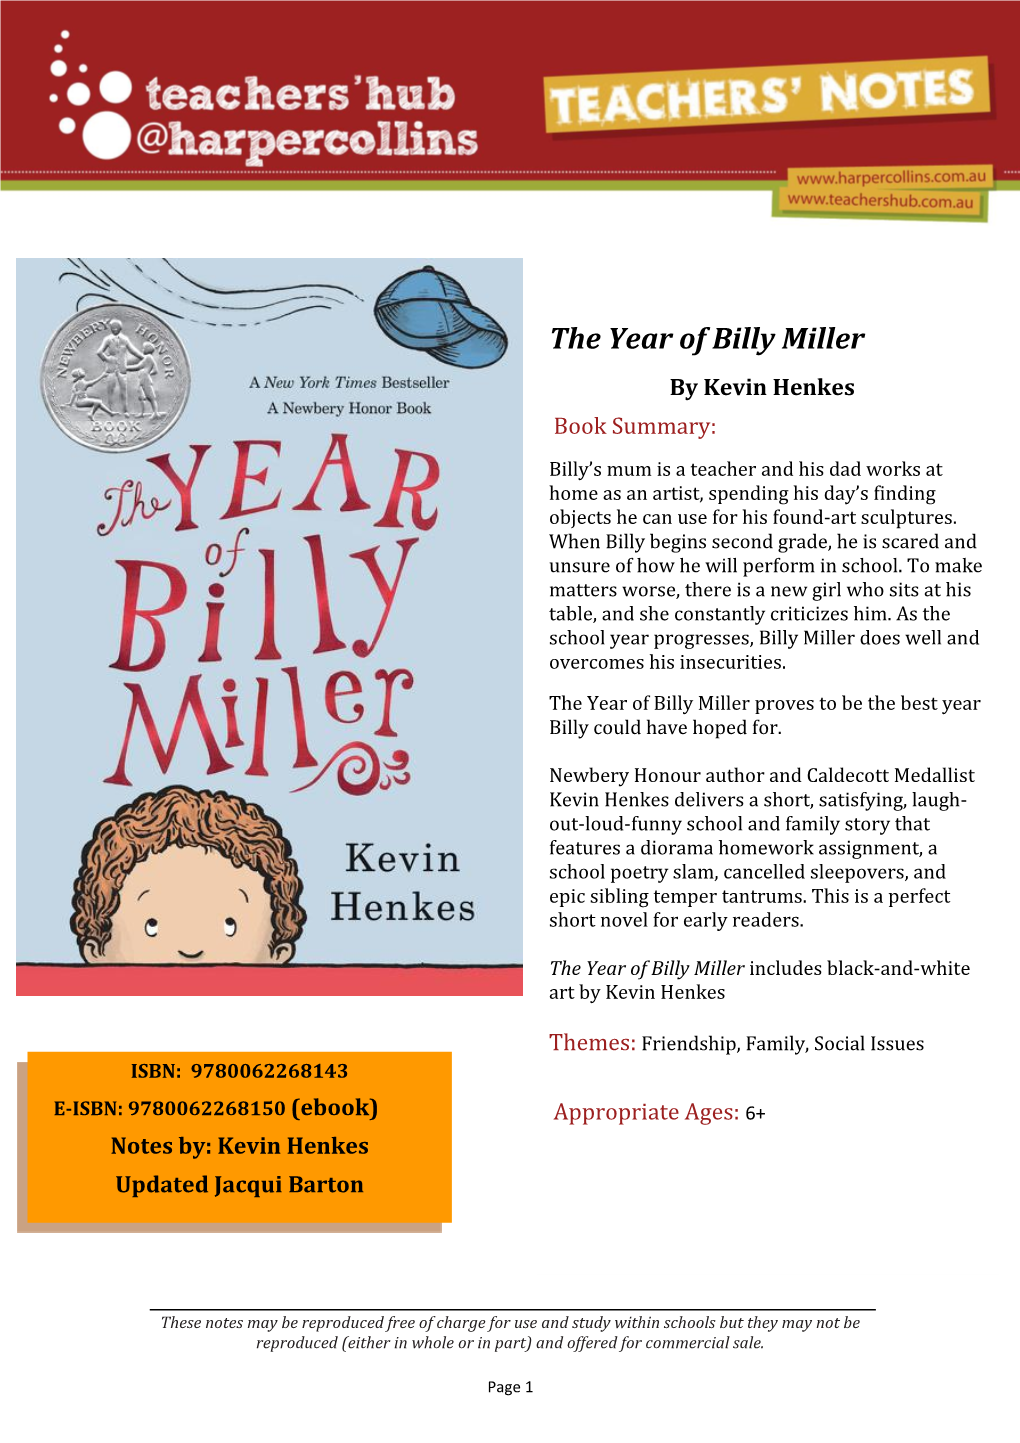 The Year of Billy Miller by Kevin Henkes Book Summary